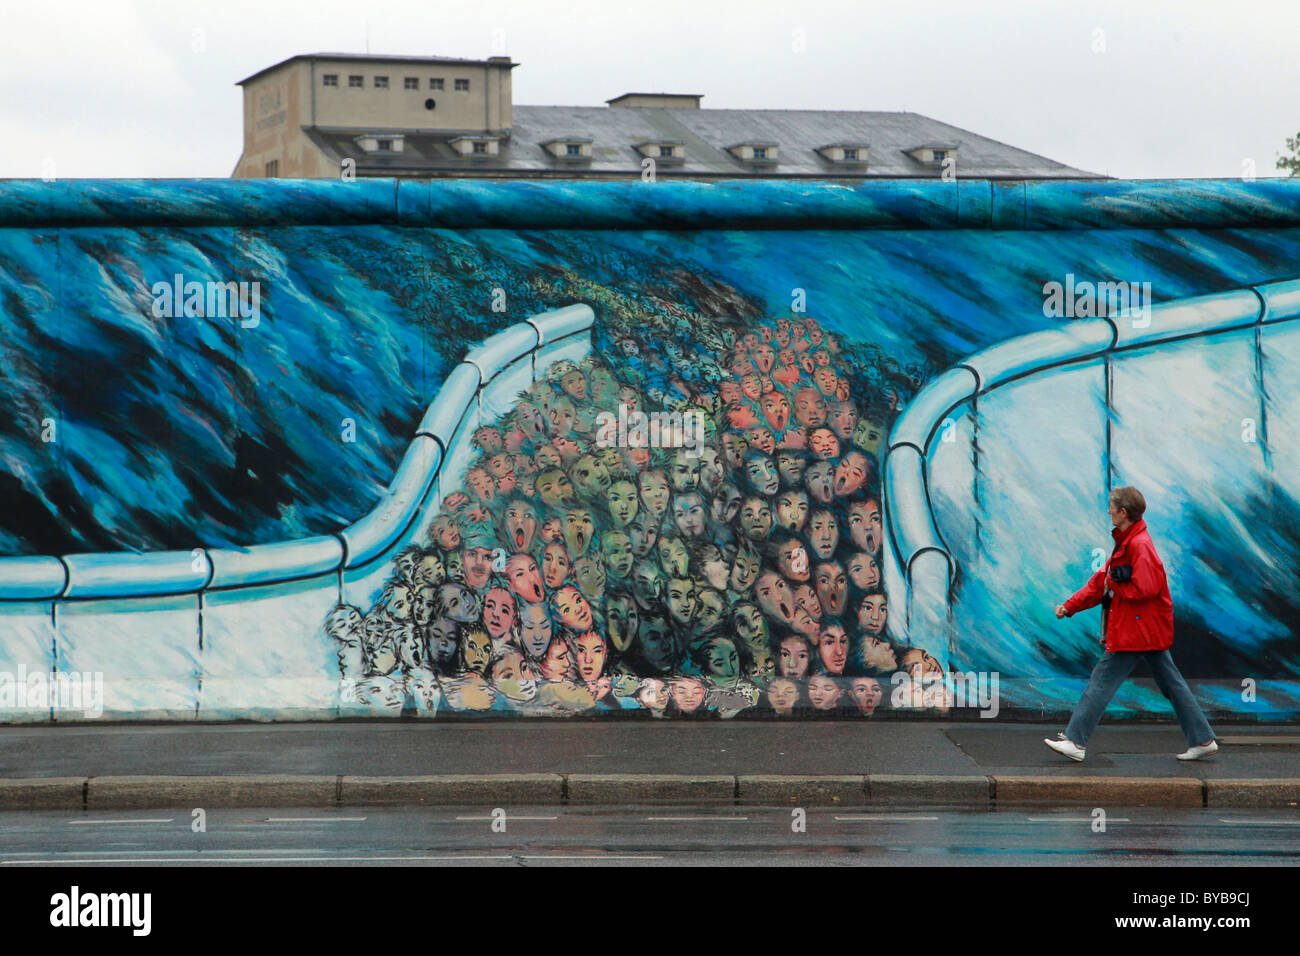 Woman in red jacket passes mural of faces on the Berlin Wall Germany Stock Photo